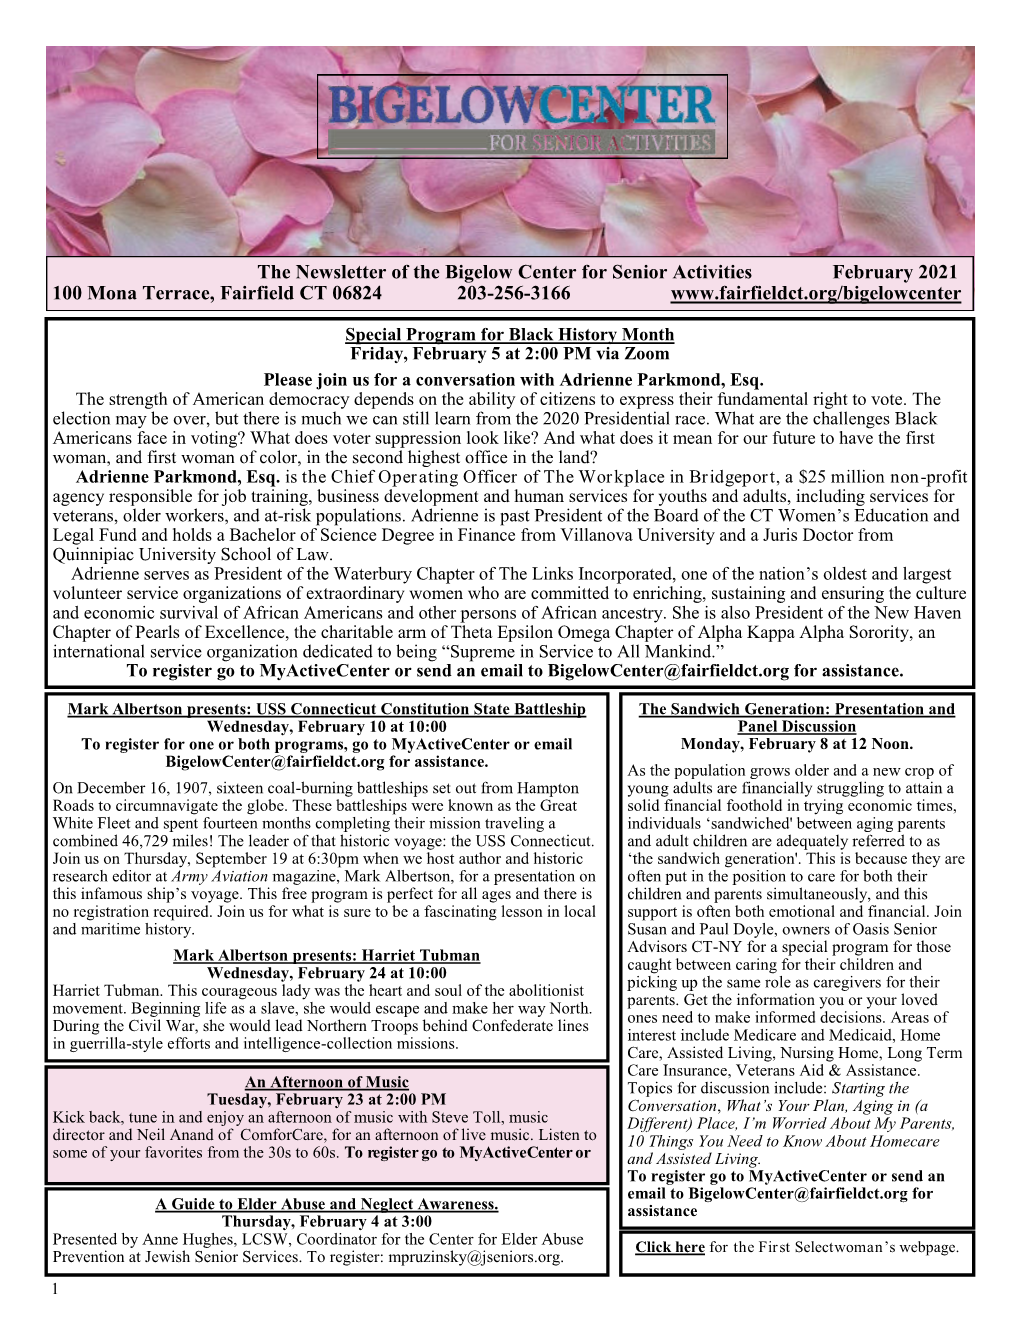 The Newsletter of the Bigelow Center for Senior Activities February 2021 100 Mona Terrace, Fairfield CT 06824 203-256-3166